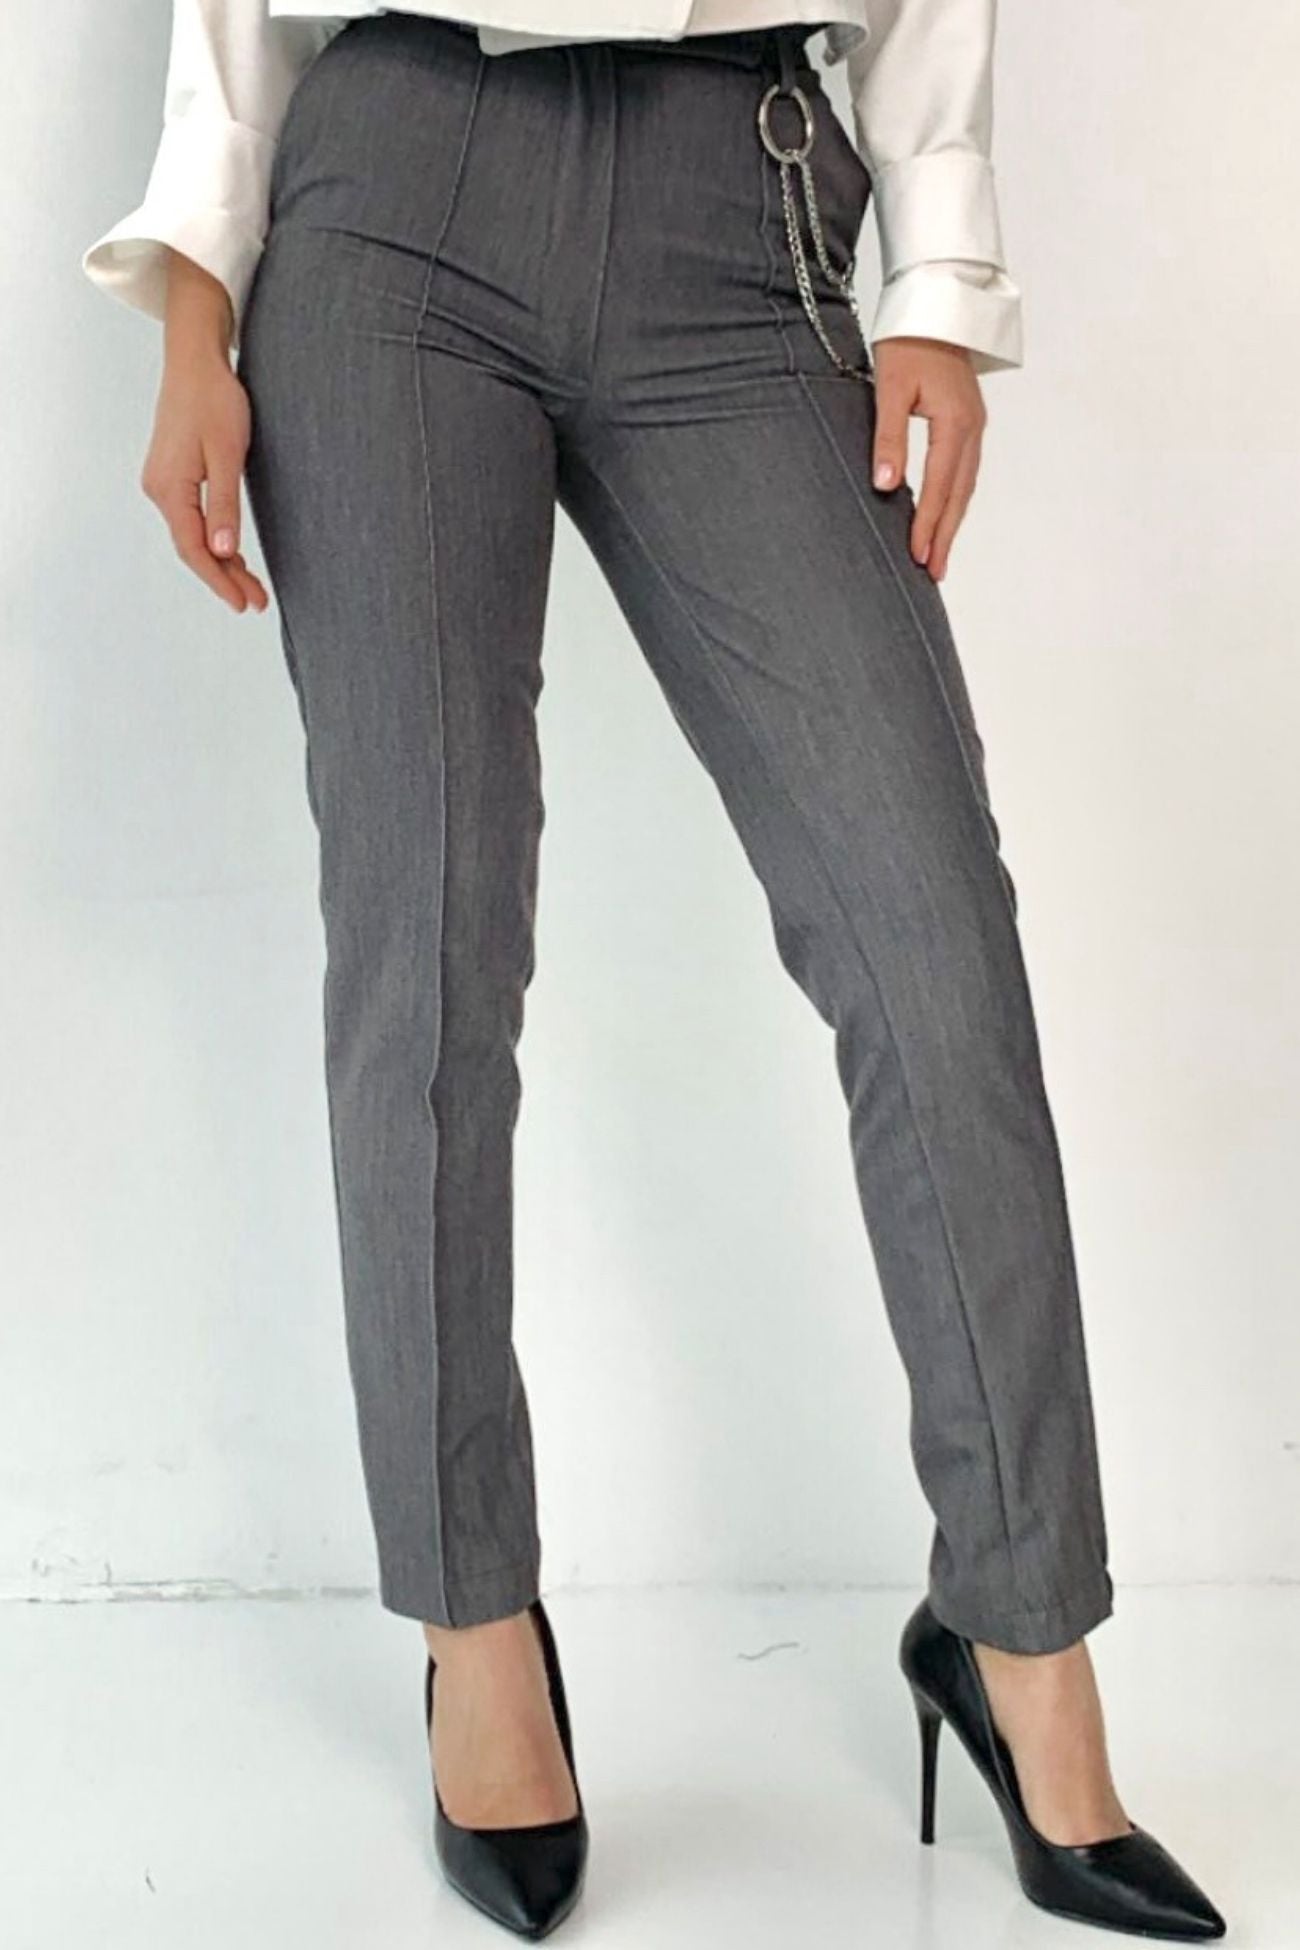 Original Grey High-Waisted Business Pants with Decorative Chain